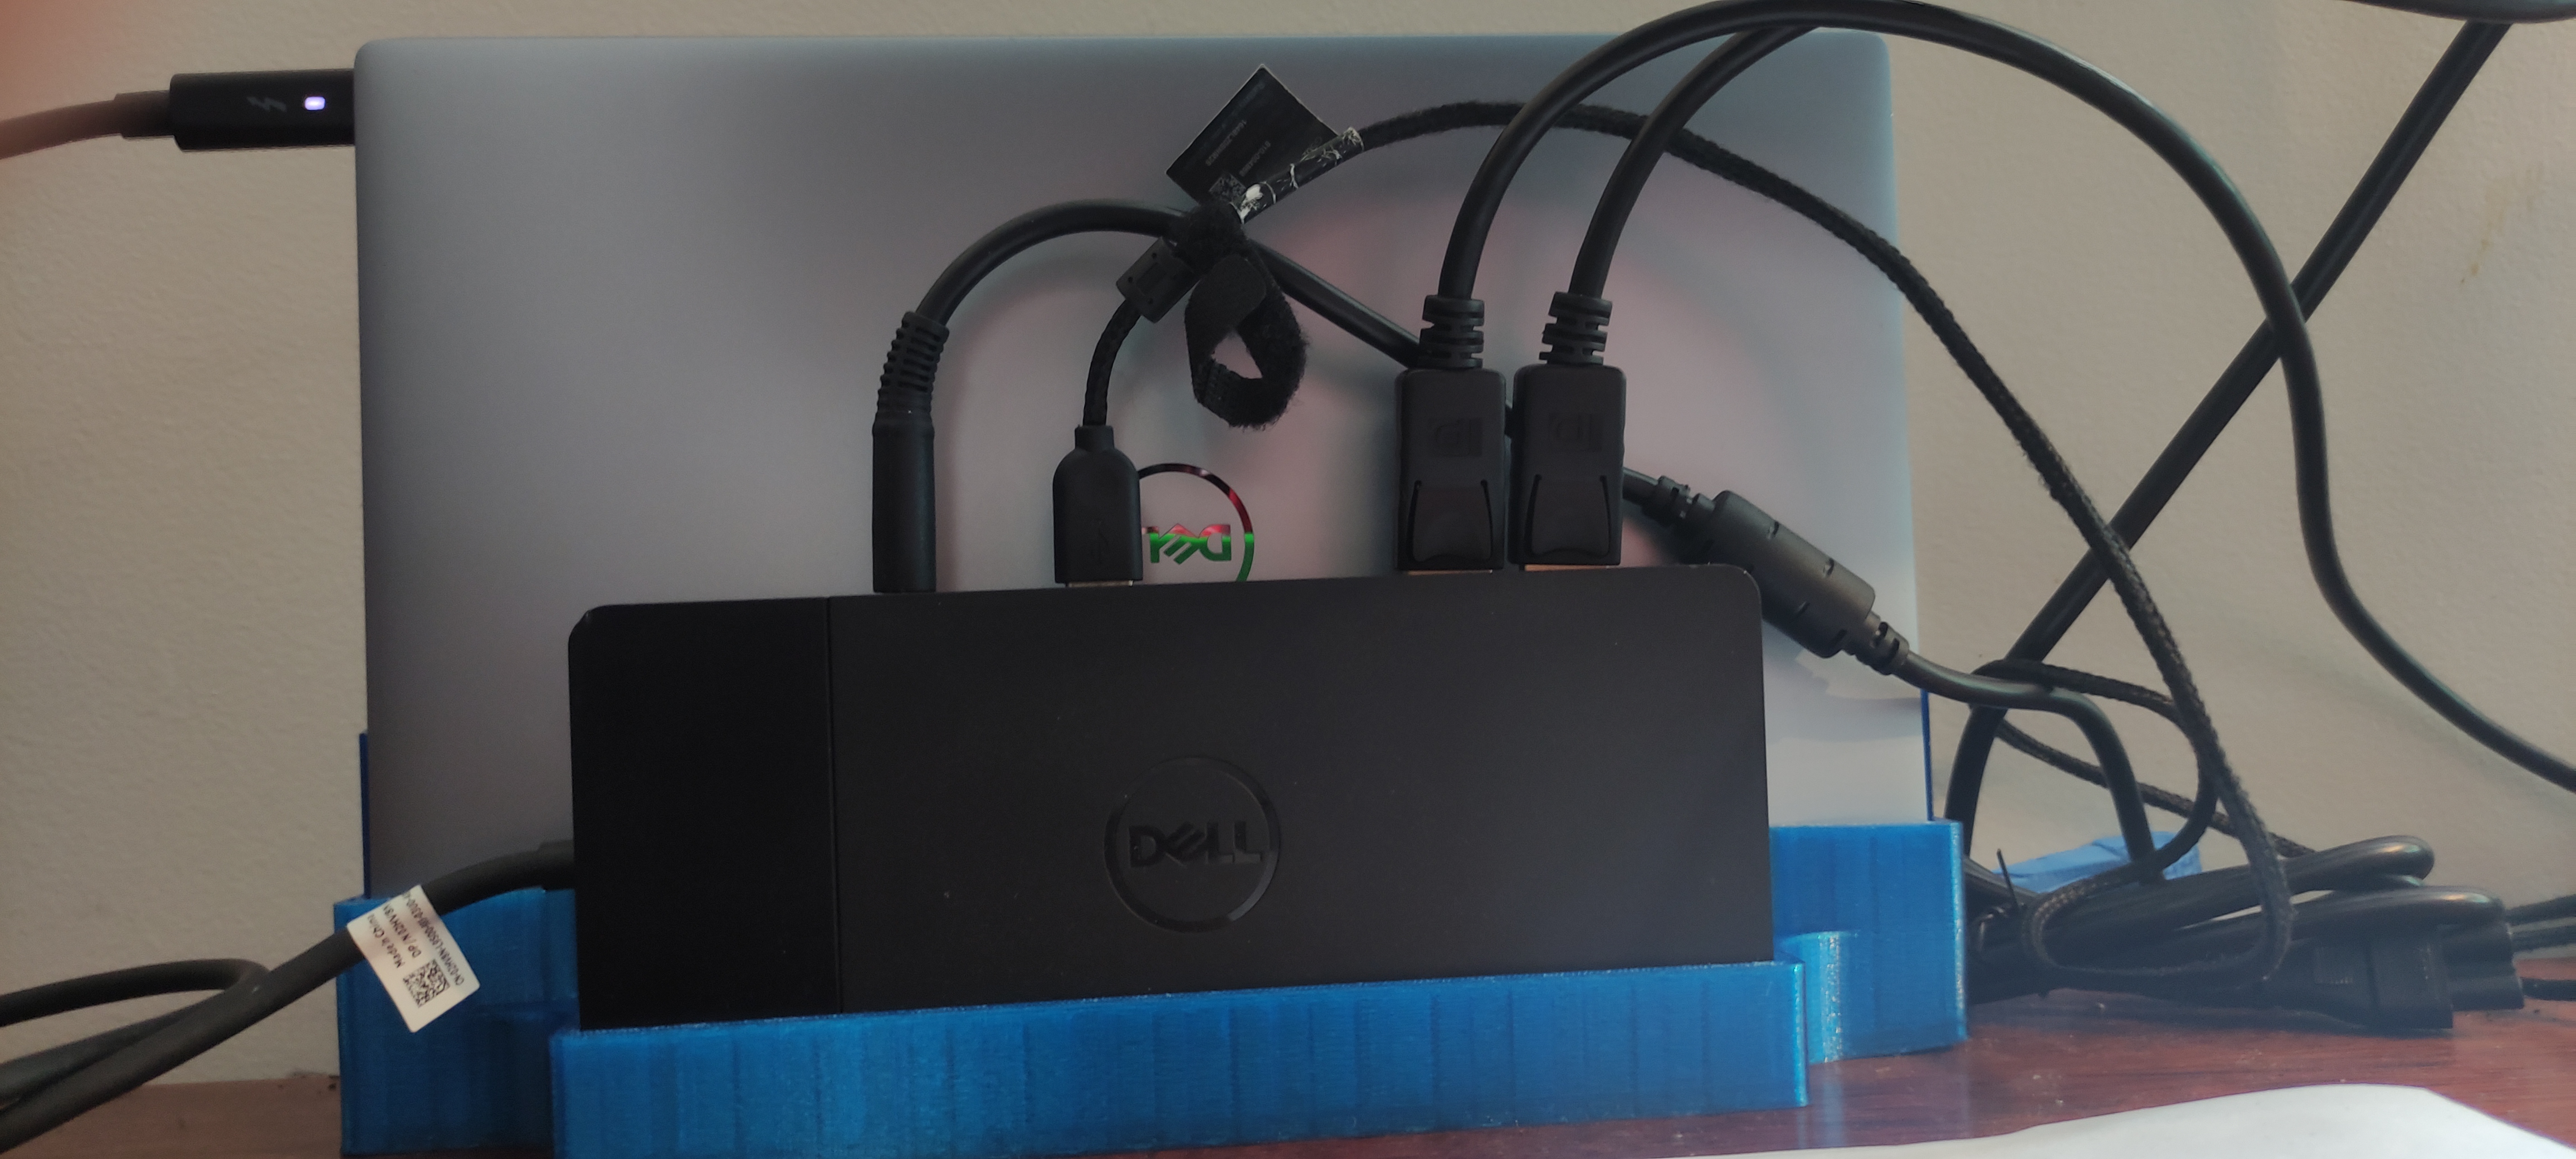 Dell XPS 13 (2022) and Dell WD19TB docking station